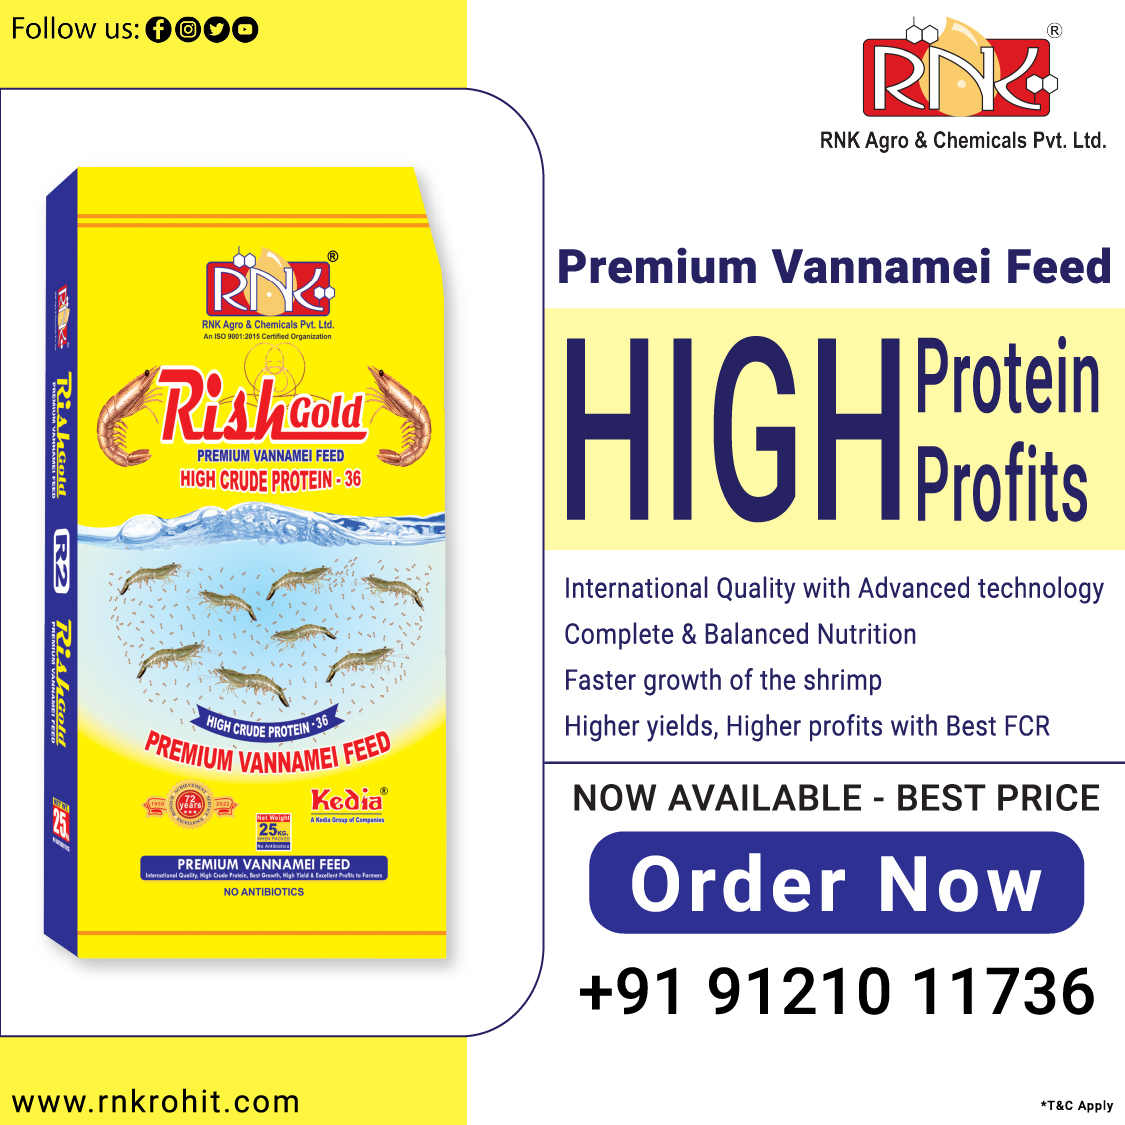 Rish Gold Premium Vannamei Feed
For order, Contact: 91210 11736
Feed Benefits:
International Quality | Complete & Balanced Nutrition
Faster Growth | Higher yields | Higher Profits | Best FCR
#shrimpfeed #animalfeed #aquaculture #aquacultureindustry #aquafeed #aquafeedsolutions